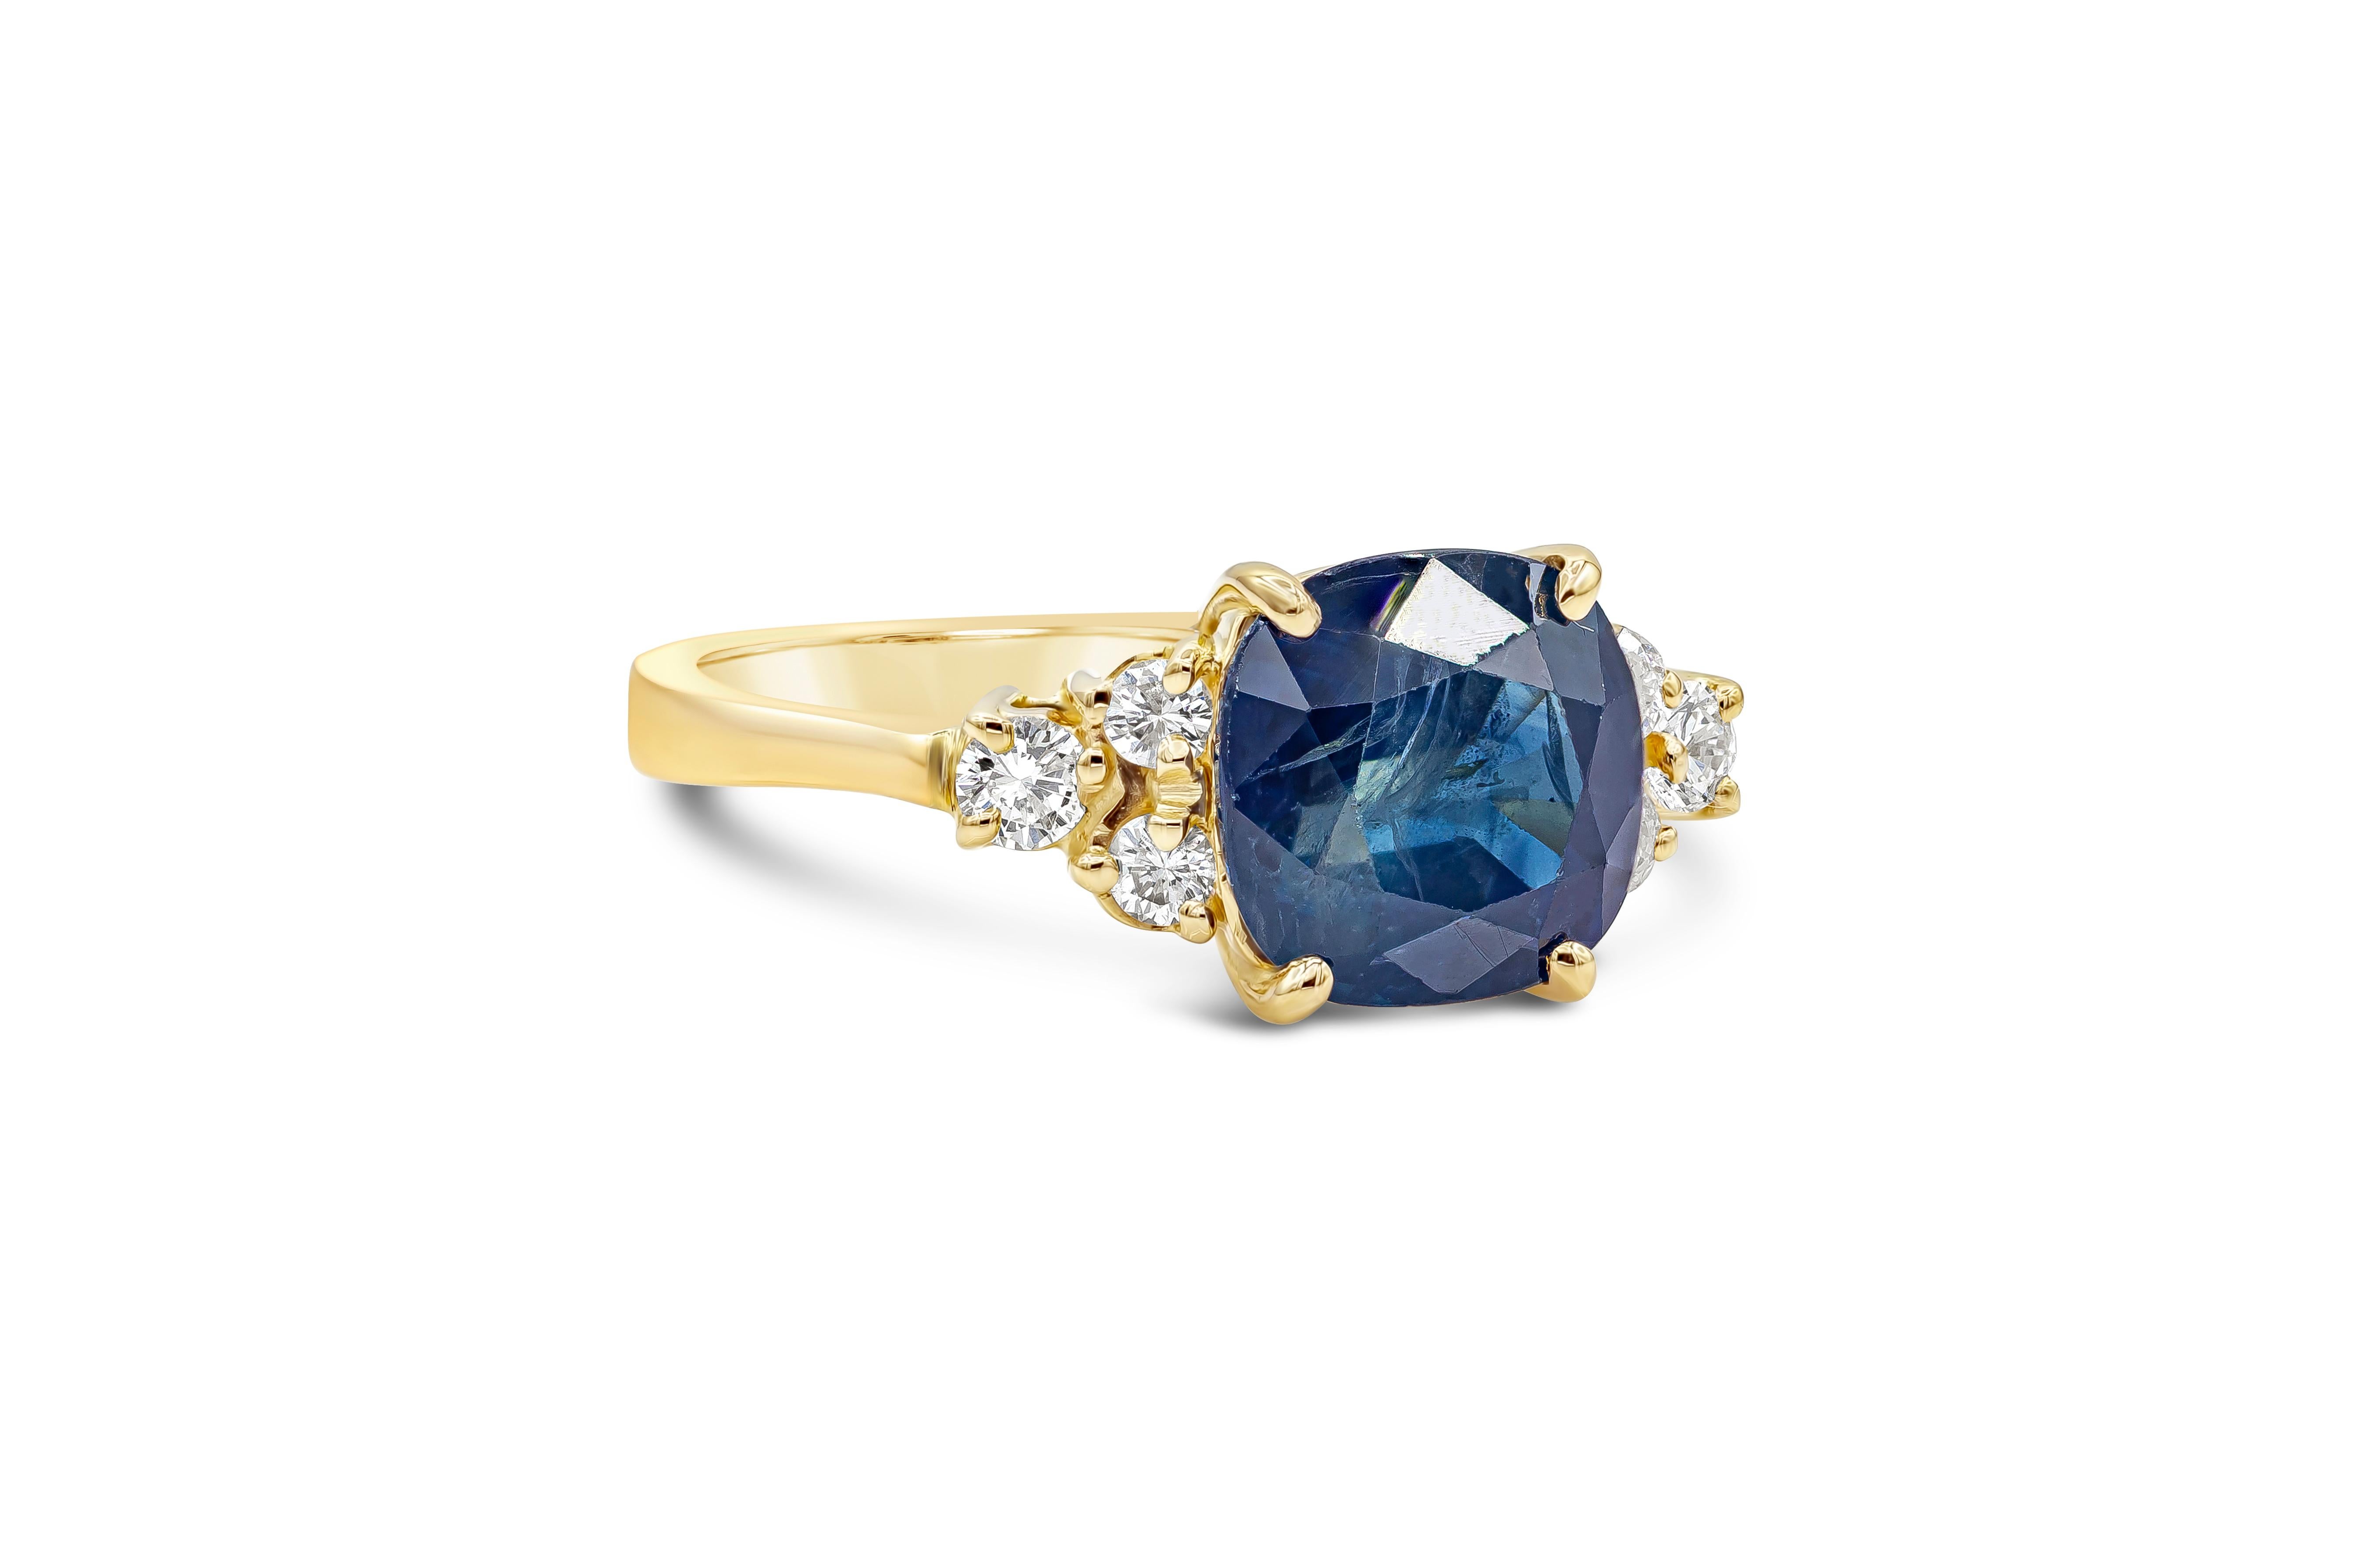 Features a color-rich cushion cut blue sapphire weighing 3.75 carats total. Flanked by round brilliant diamonds set in a triangular style. Diamonds weigh 0.37 carats total. Made with 14K Yellow Gold, Size 7.25 US resizable upon request.

Style